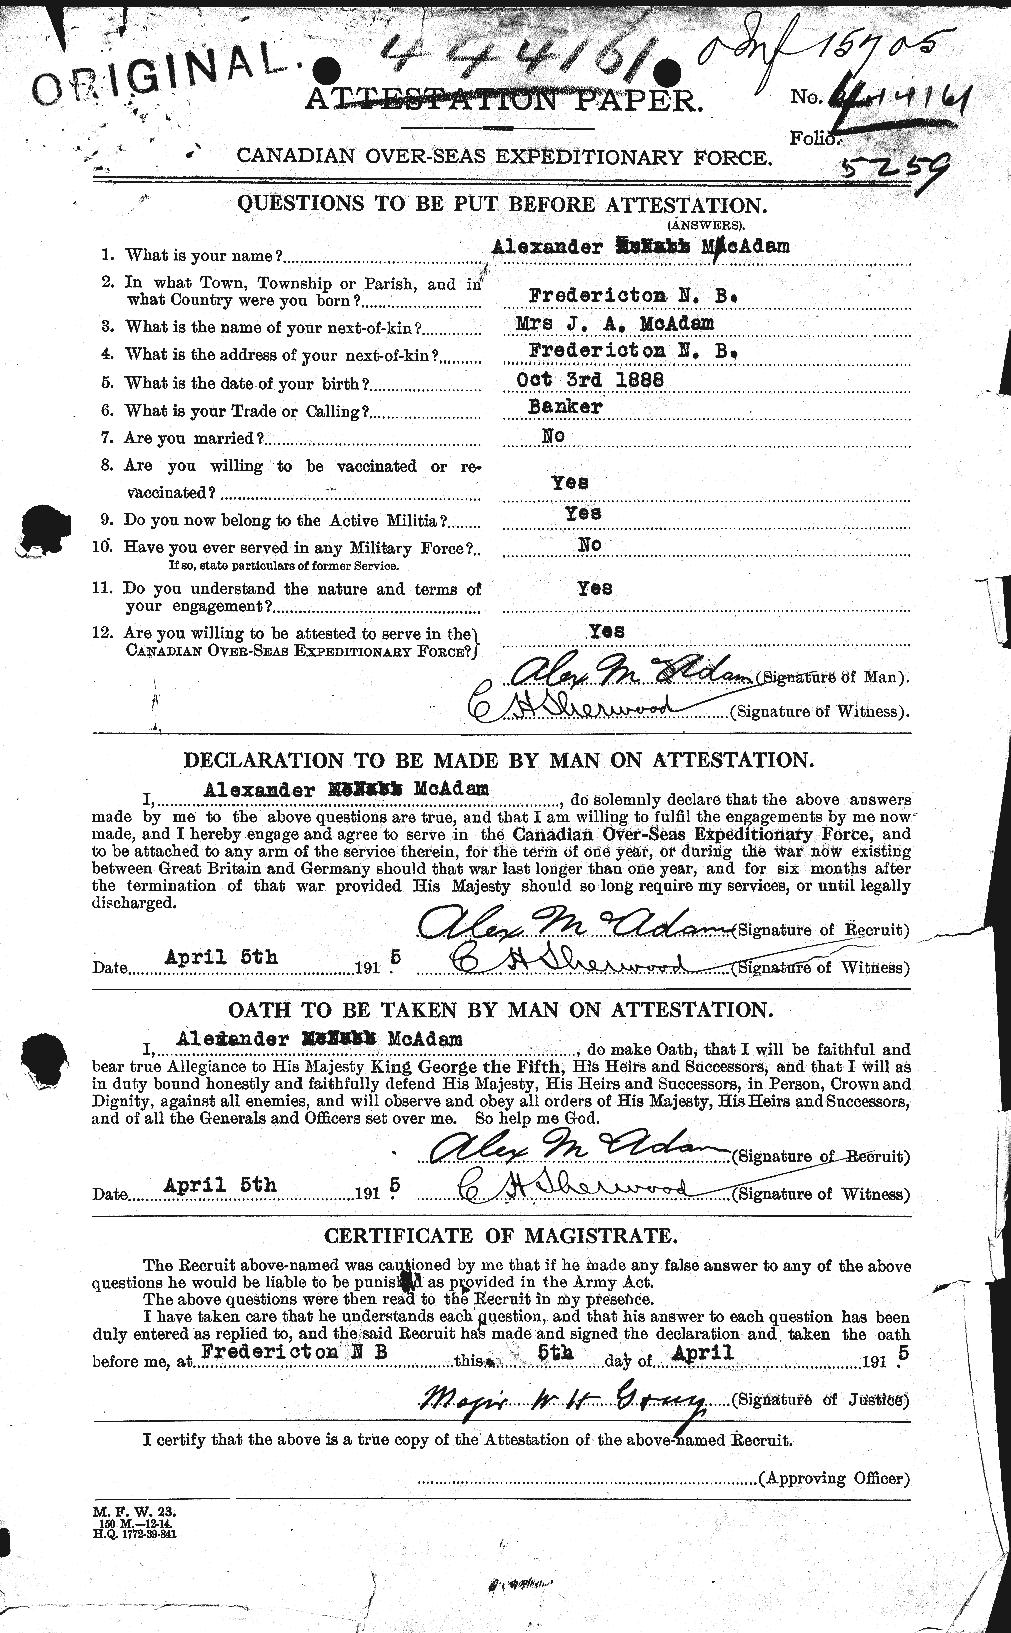 Personnel Records of the First World War - CEF 130474a